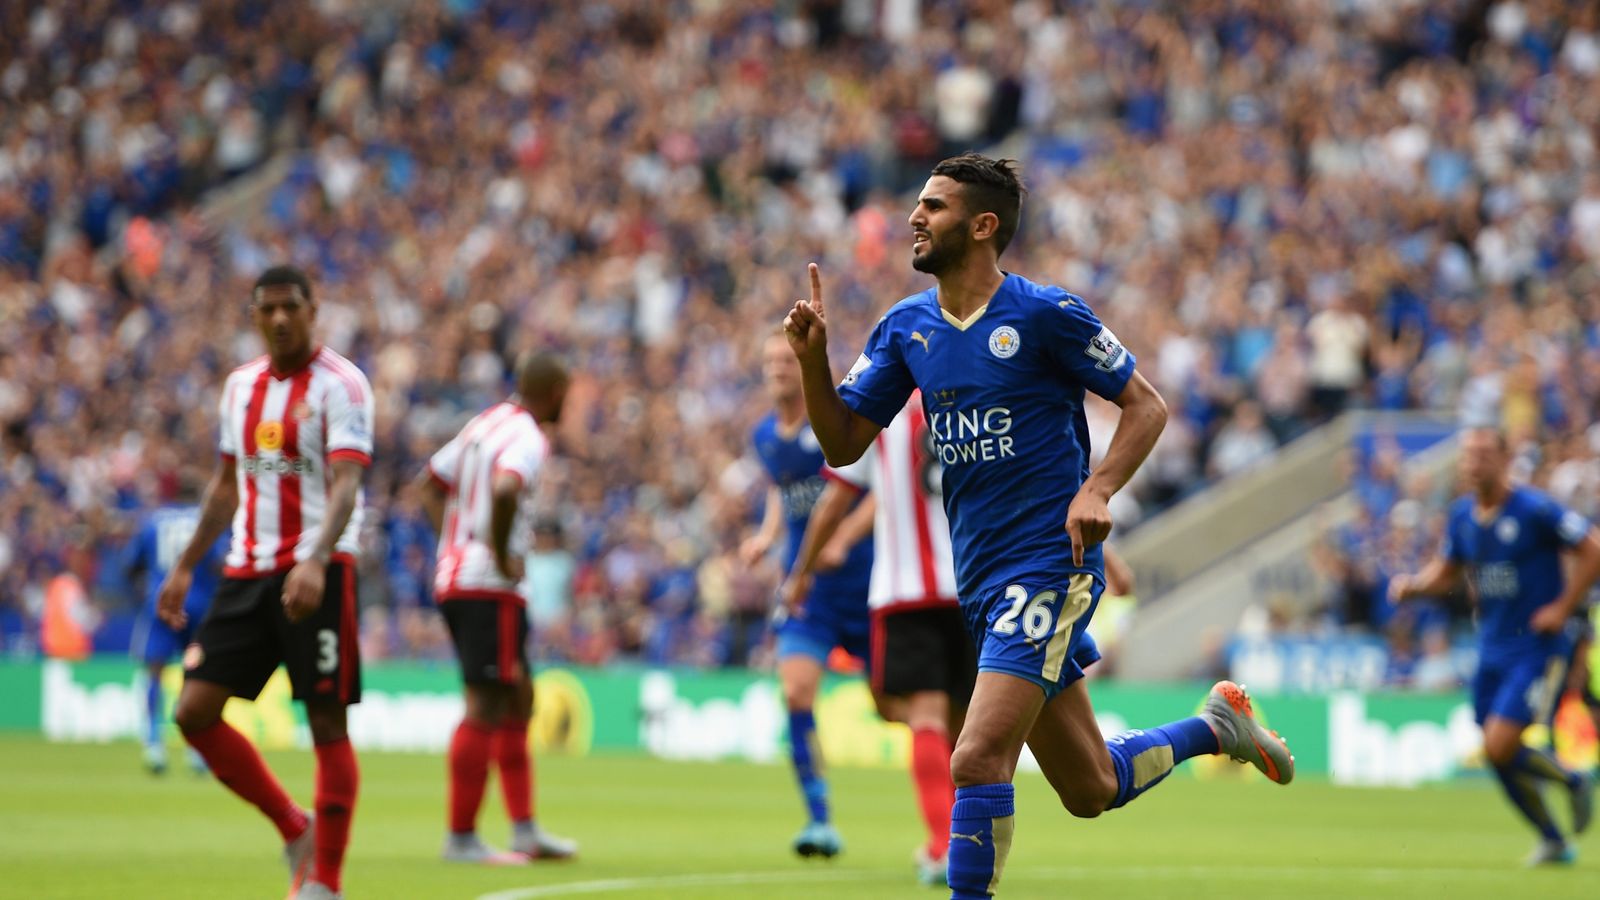 Watch Leicester City vs Sunderland Live Stream, How To Watch Championship Round 13 Live TV Info Worldwide